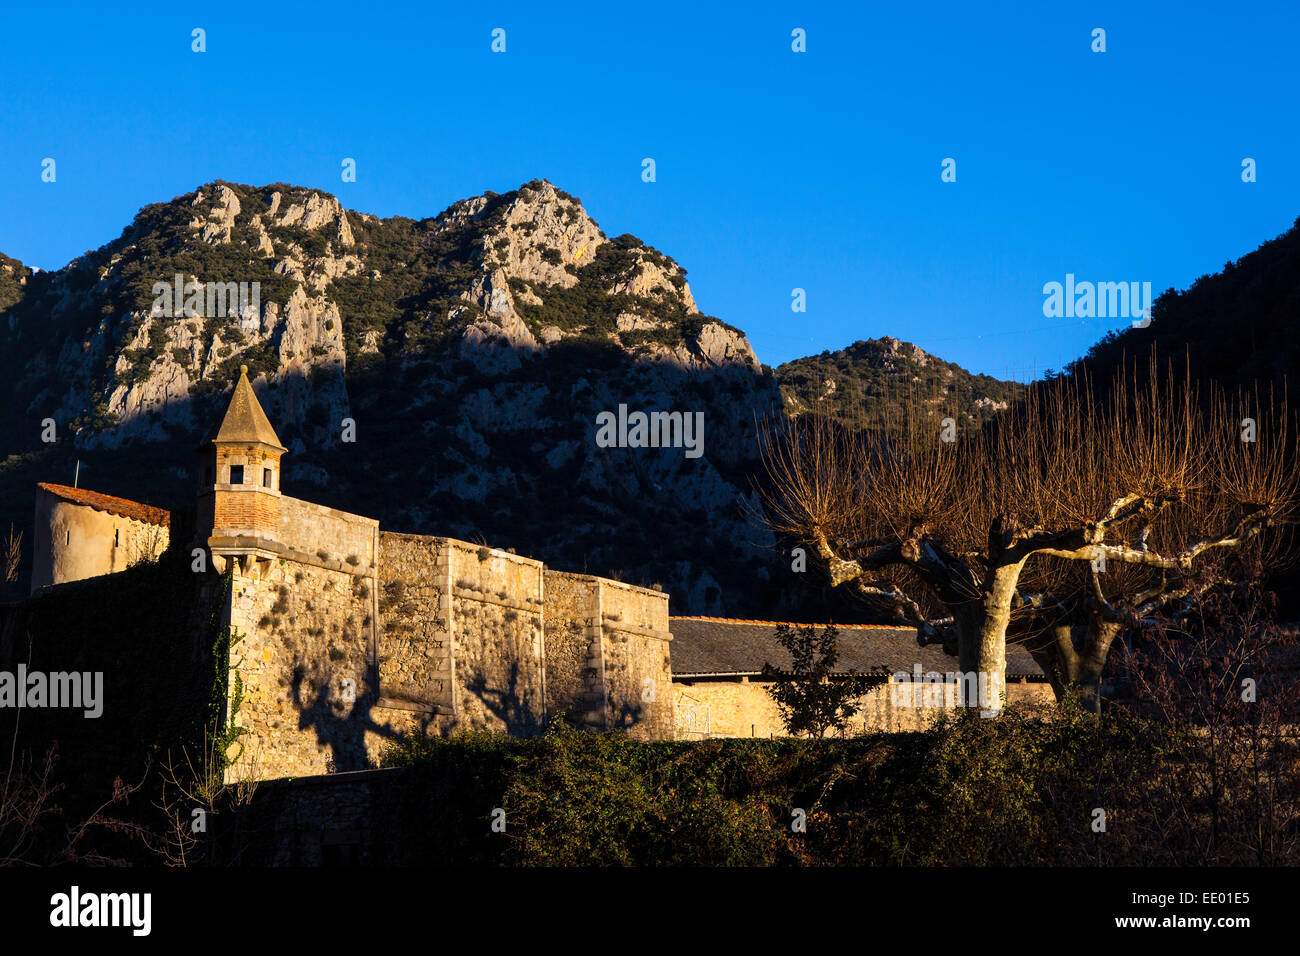 Sunset in Villefranche-de-Conflent, a Vauban-designed fortified town at the confluence of the rivers Tet & Cady in the Pyrenees Stock Photo